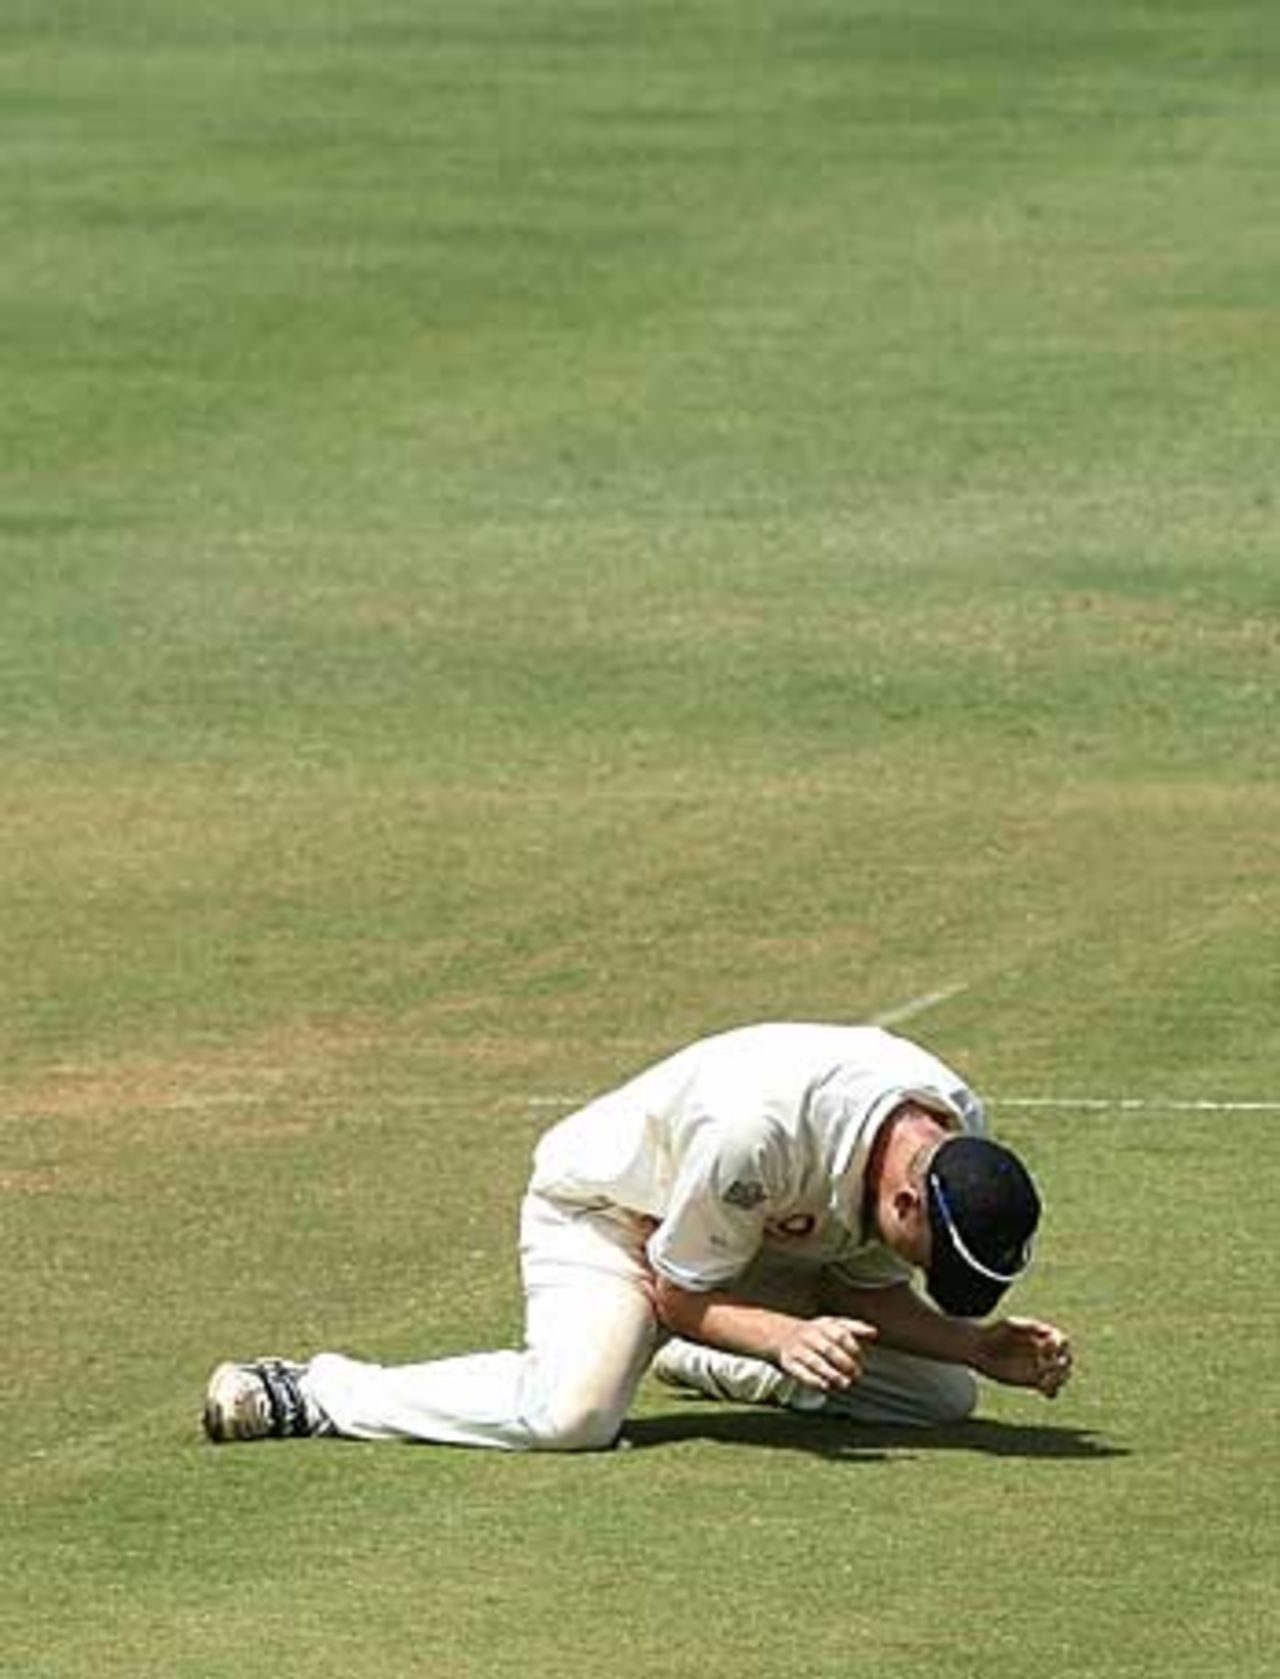 Relief and delight for Andrew Flintoff after England beat India comprehensively, India v England, 3rd Test, Mumbai, March 22, 2006